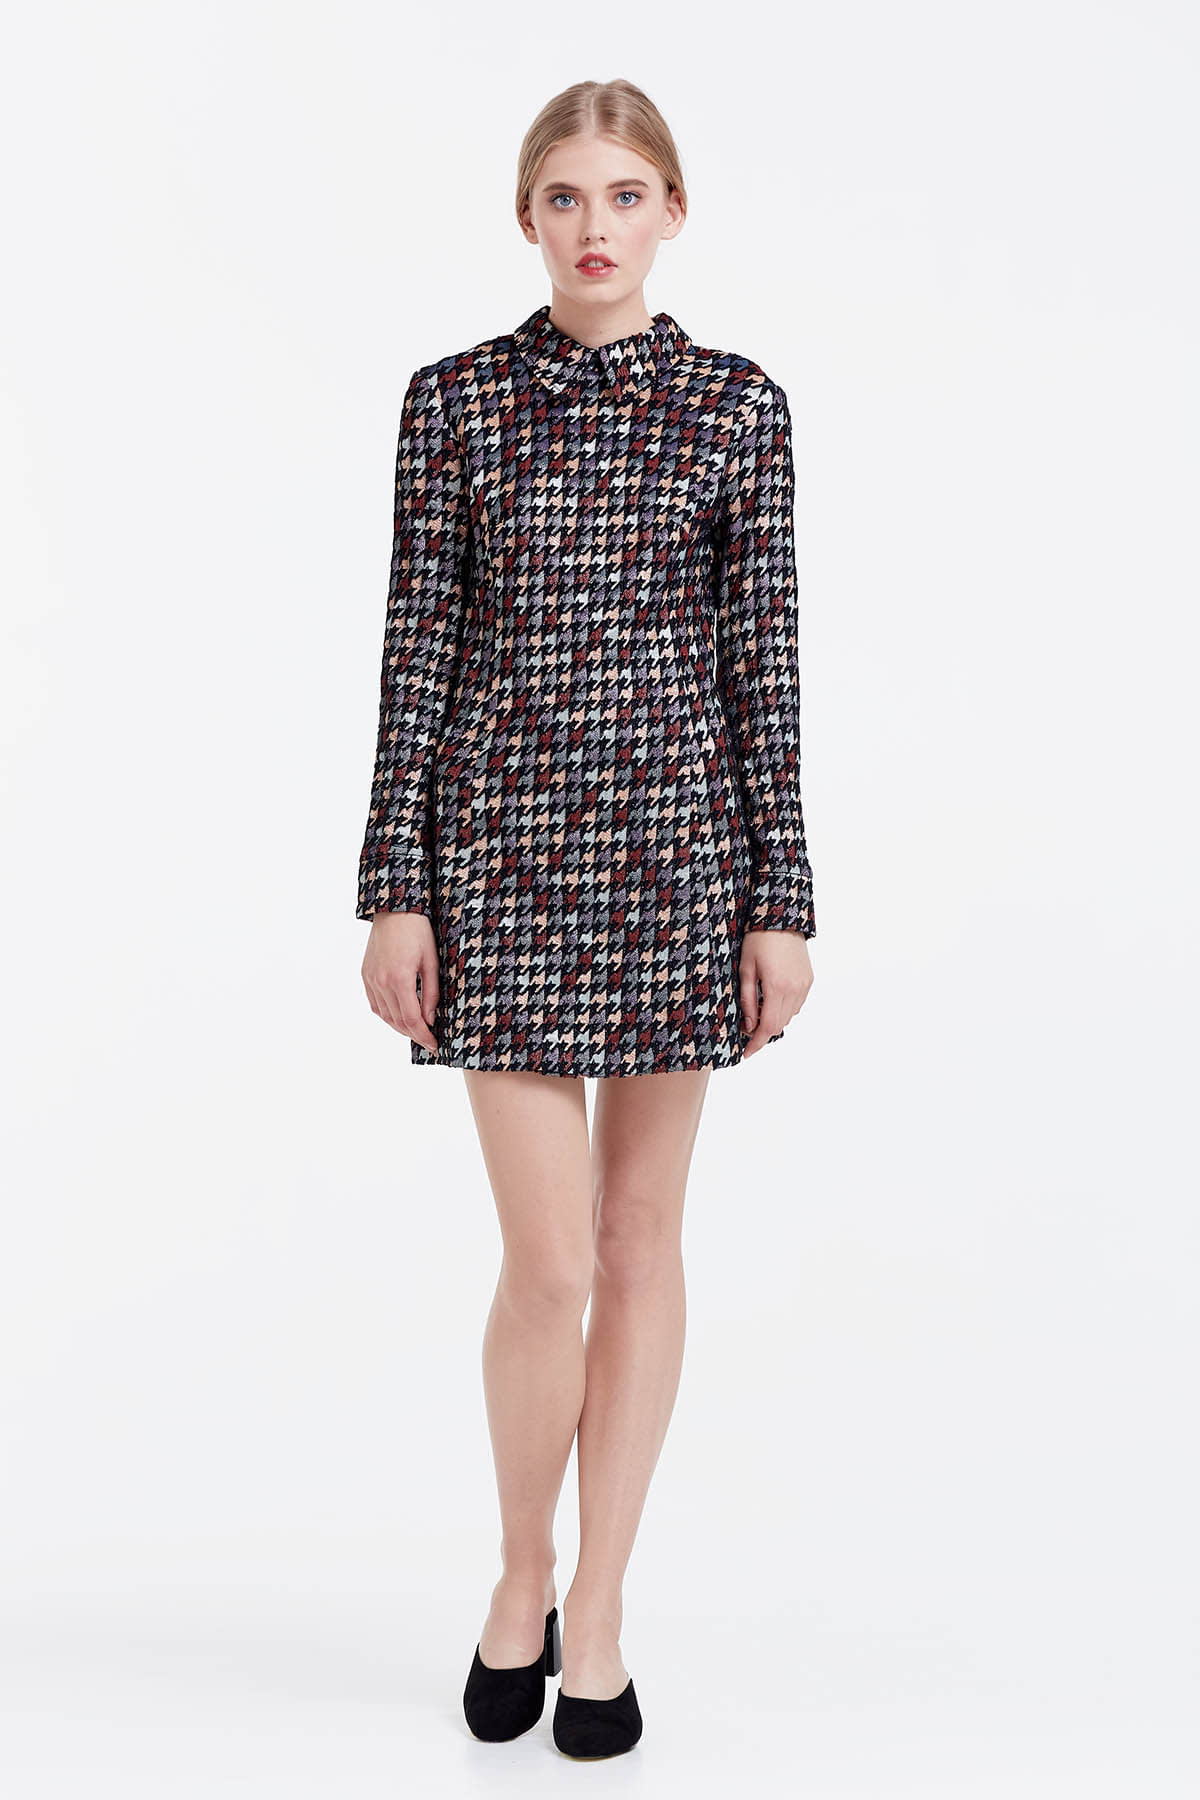 Mini dress with a houndstooth print and a collar, photo 2